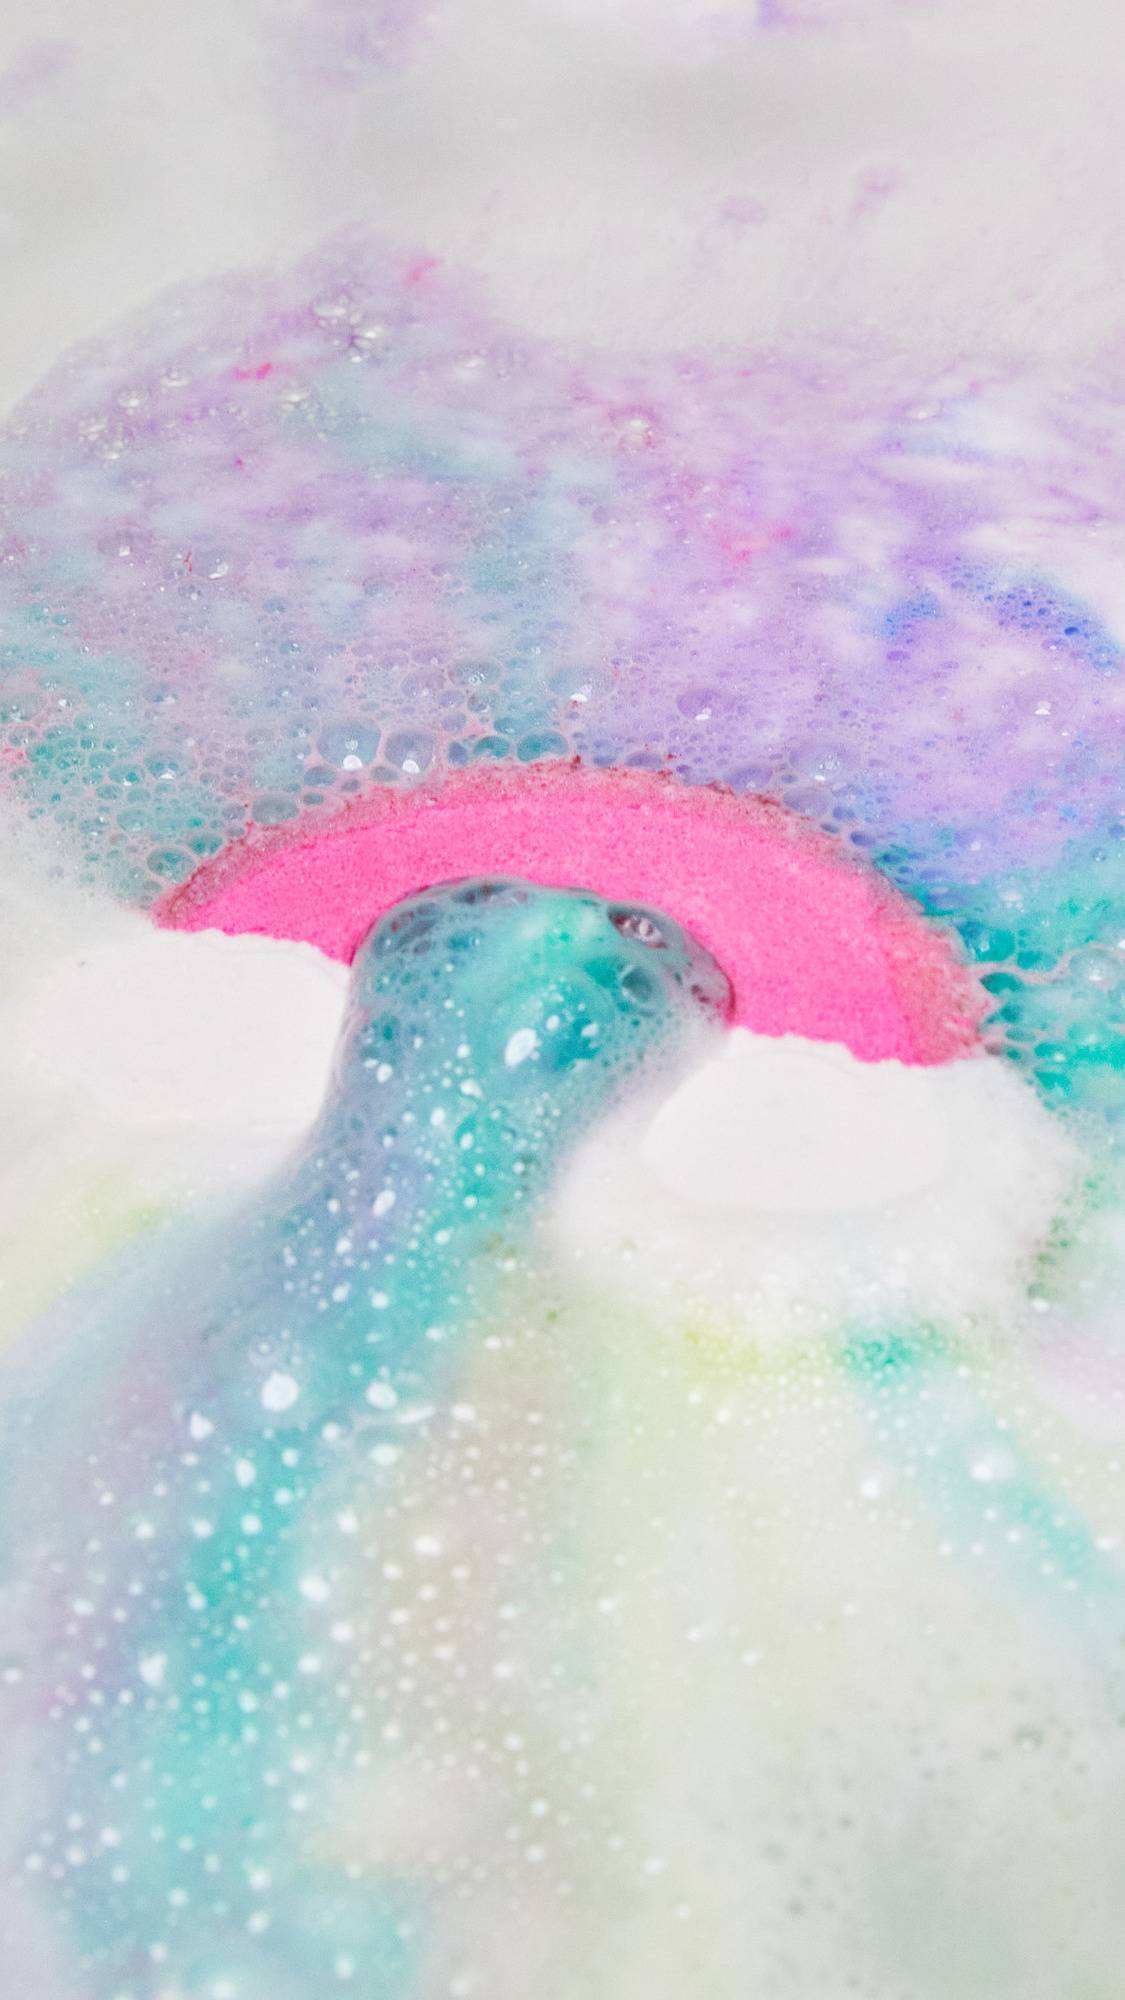 A close-up of the Somewhere bath bomb being placed into the bath water as it immediately ripples out pastel blue, pink and purple.